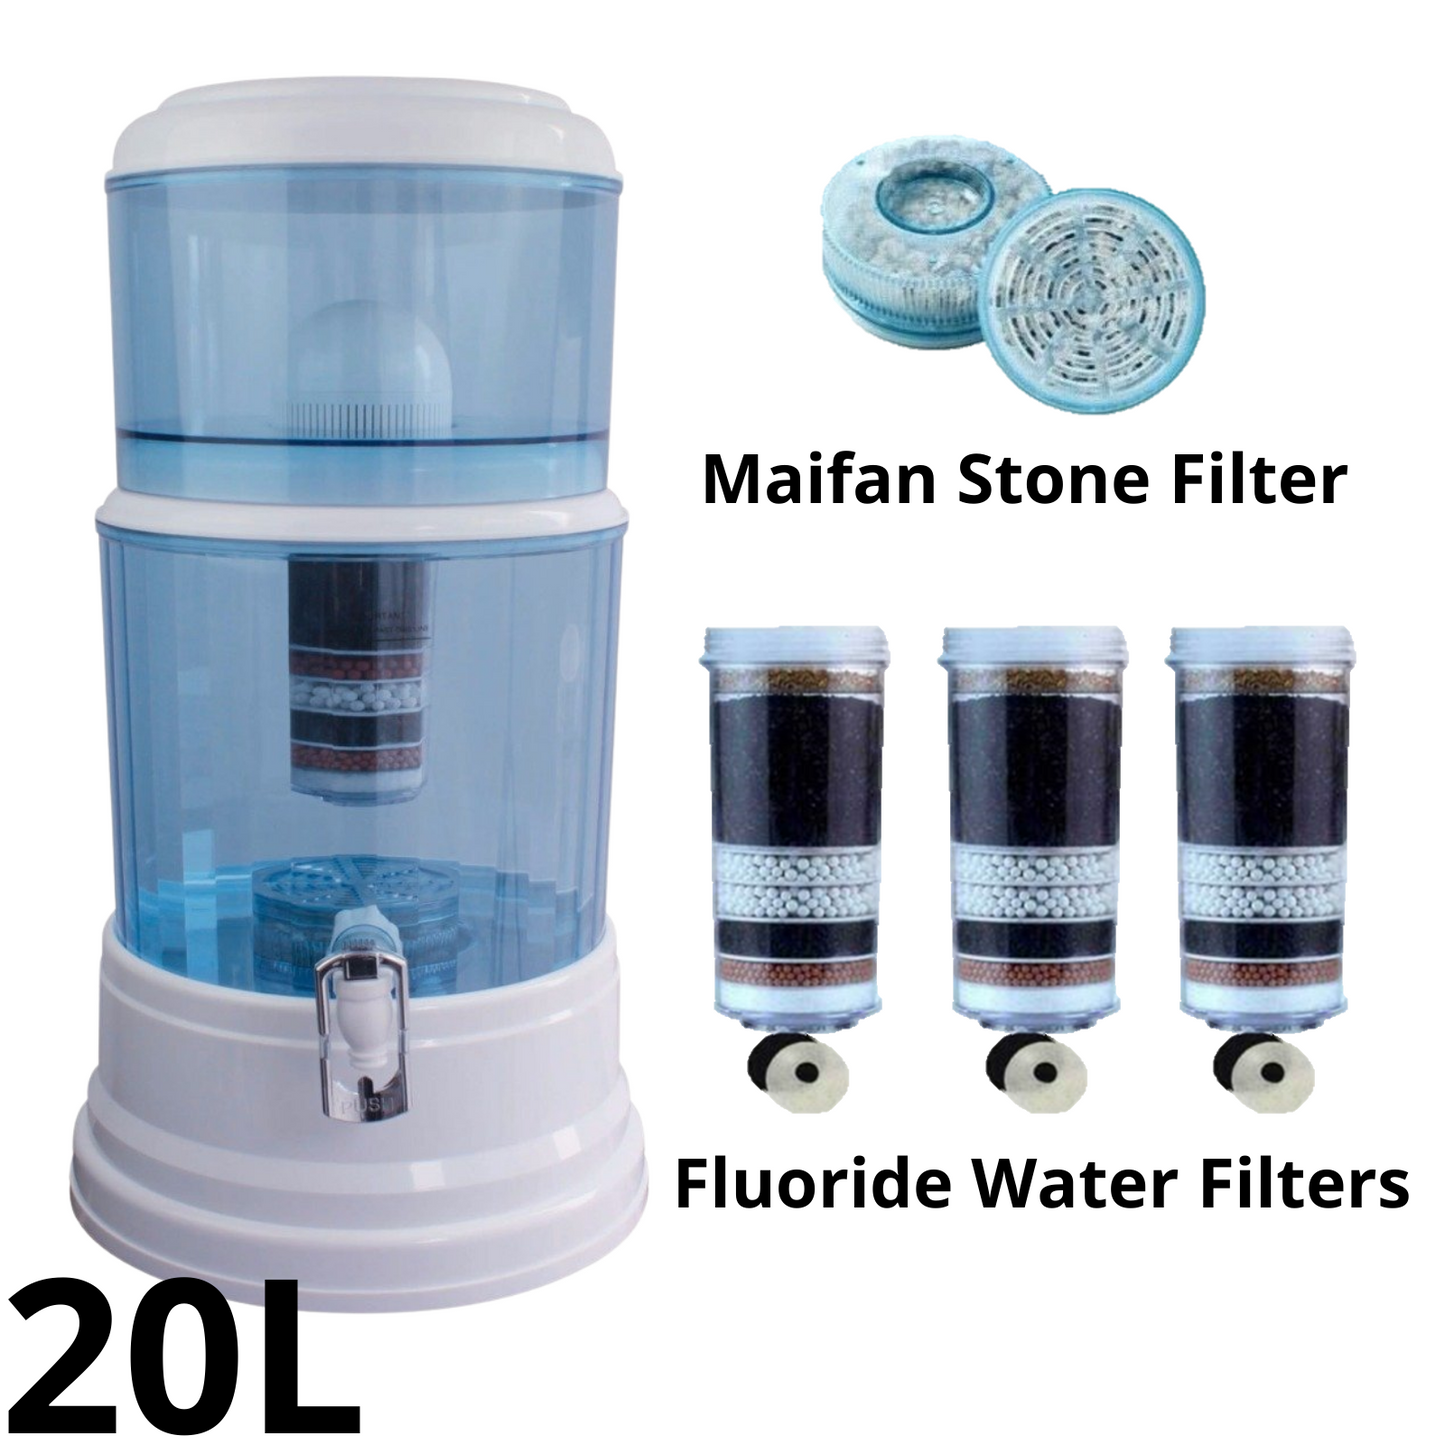 20L Water Dispenser Benchtop Purifier With 3 Fluoride Filters & Maifan Stone